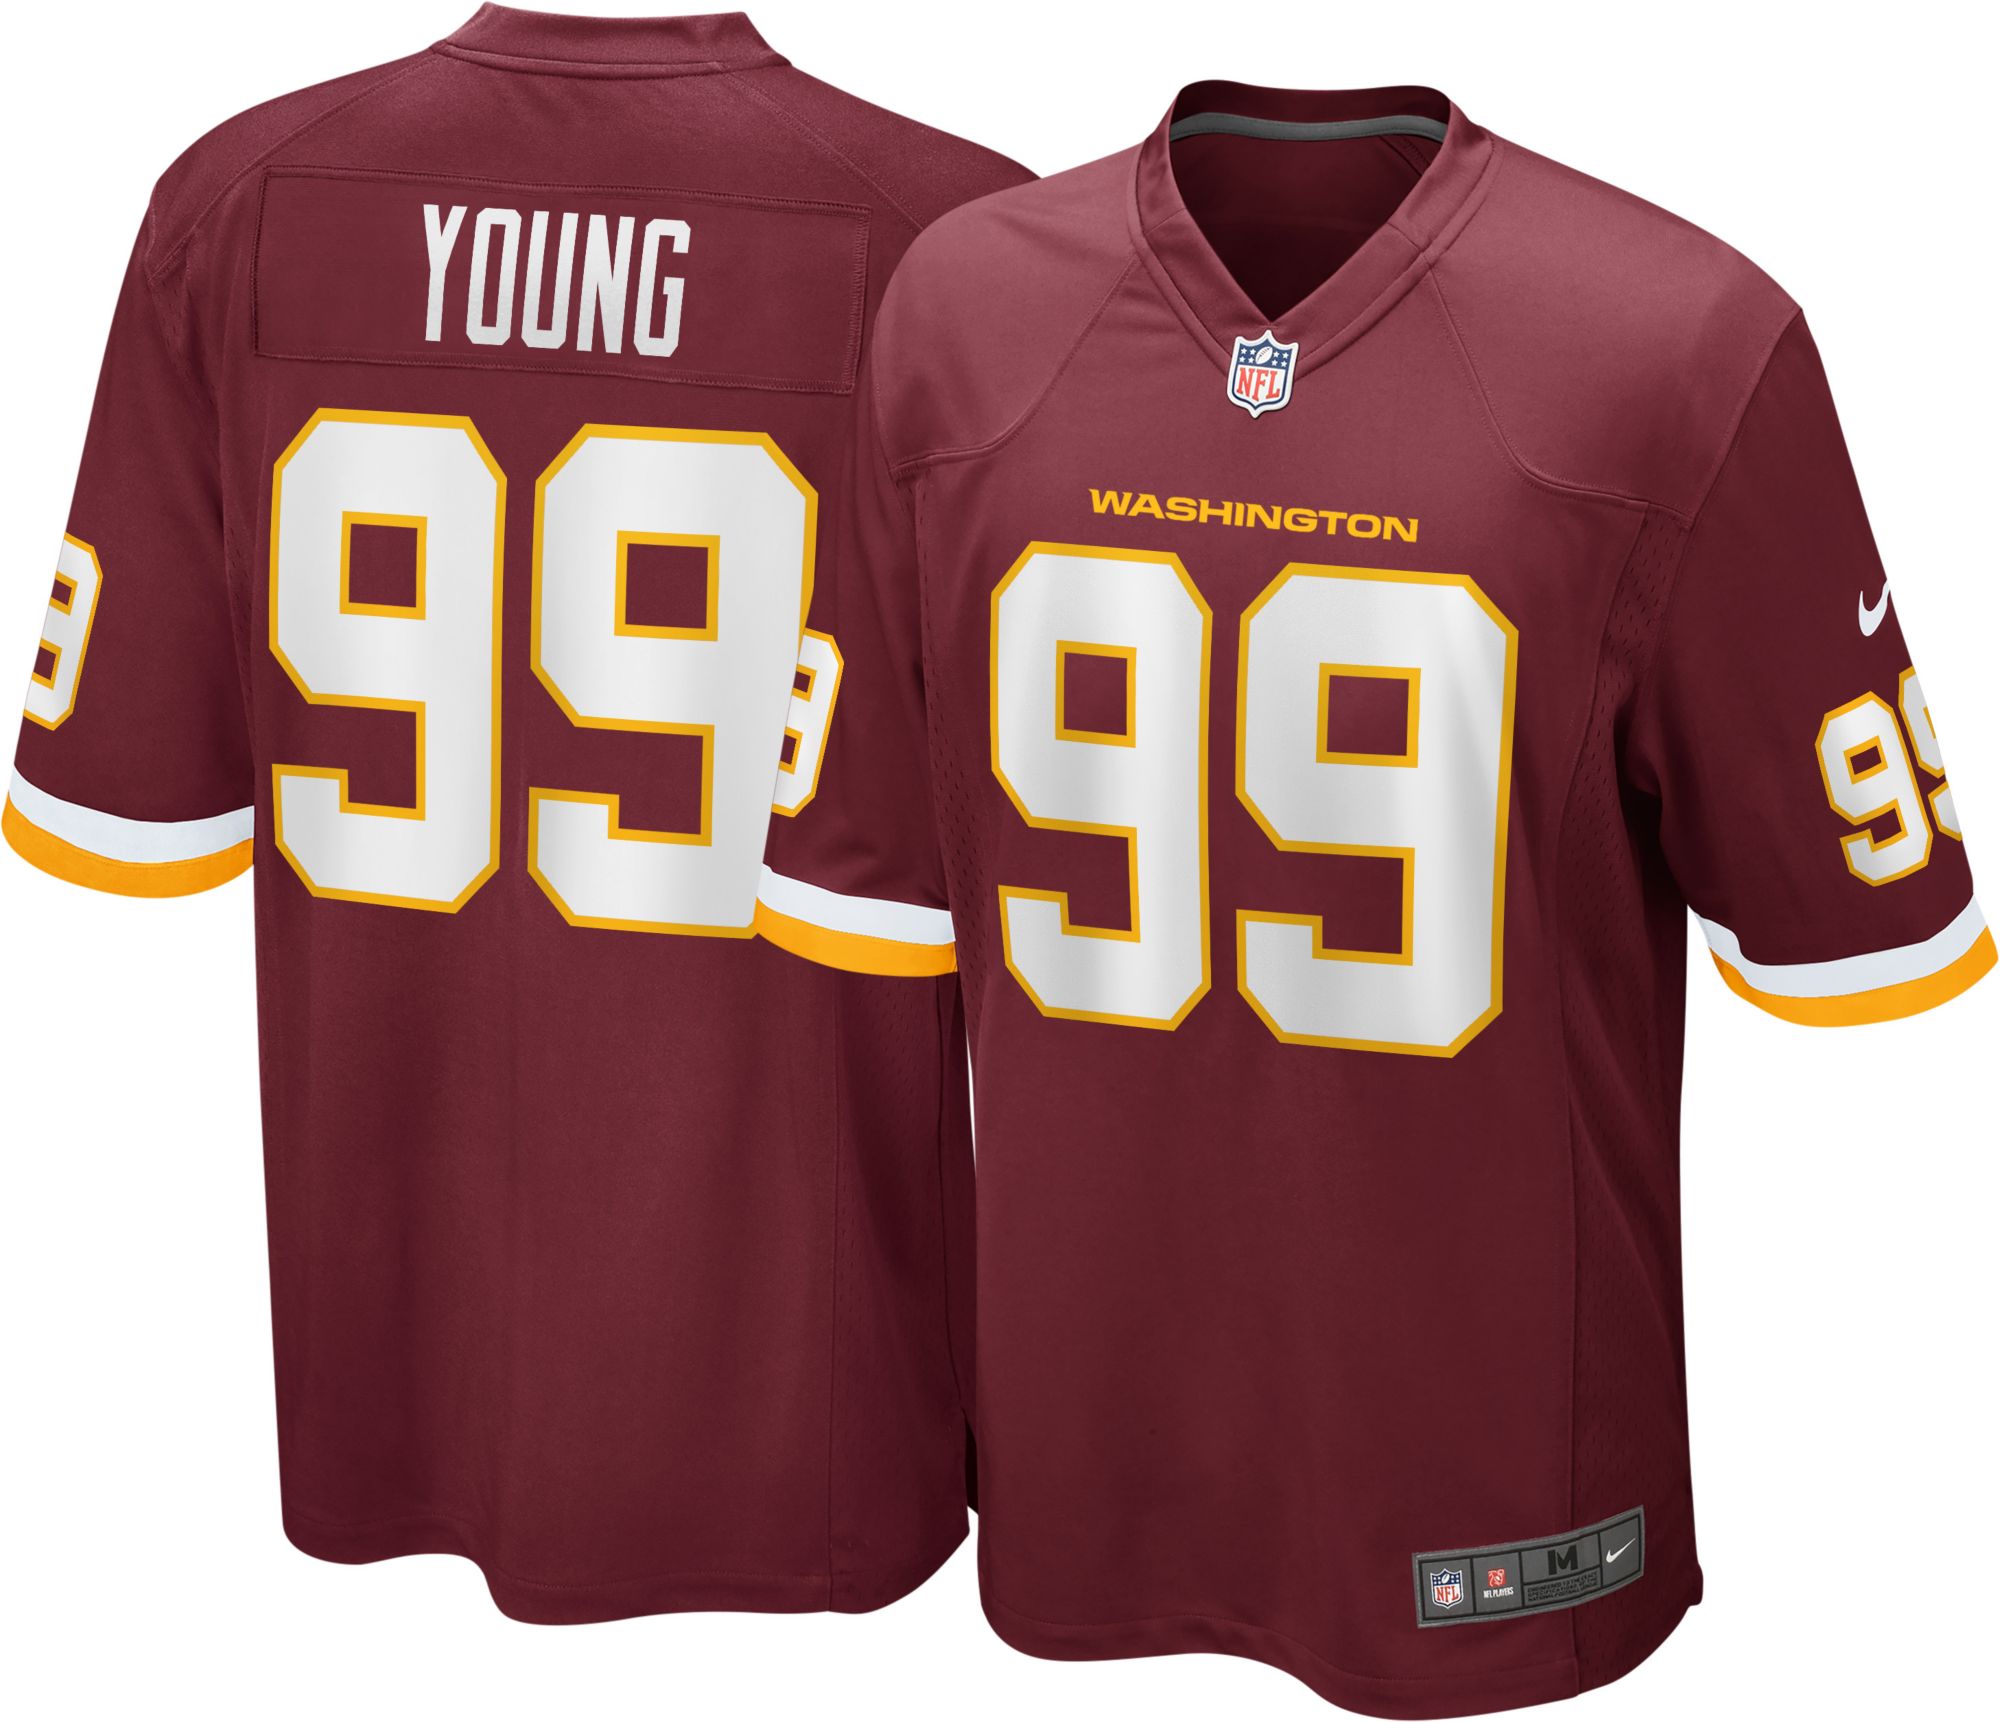 chase young redskins jersey 99